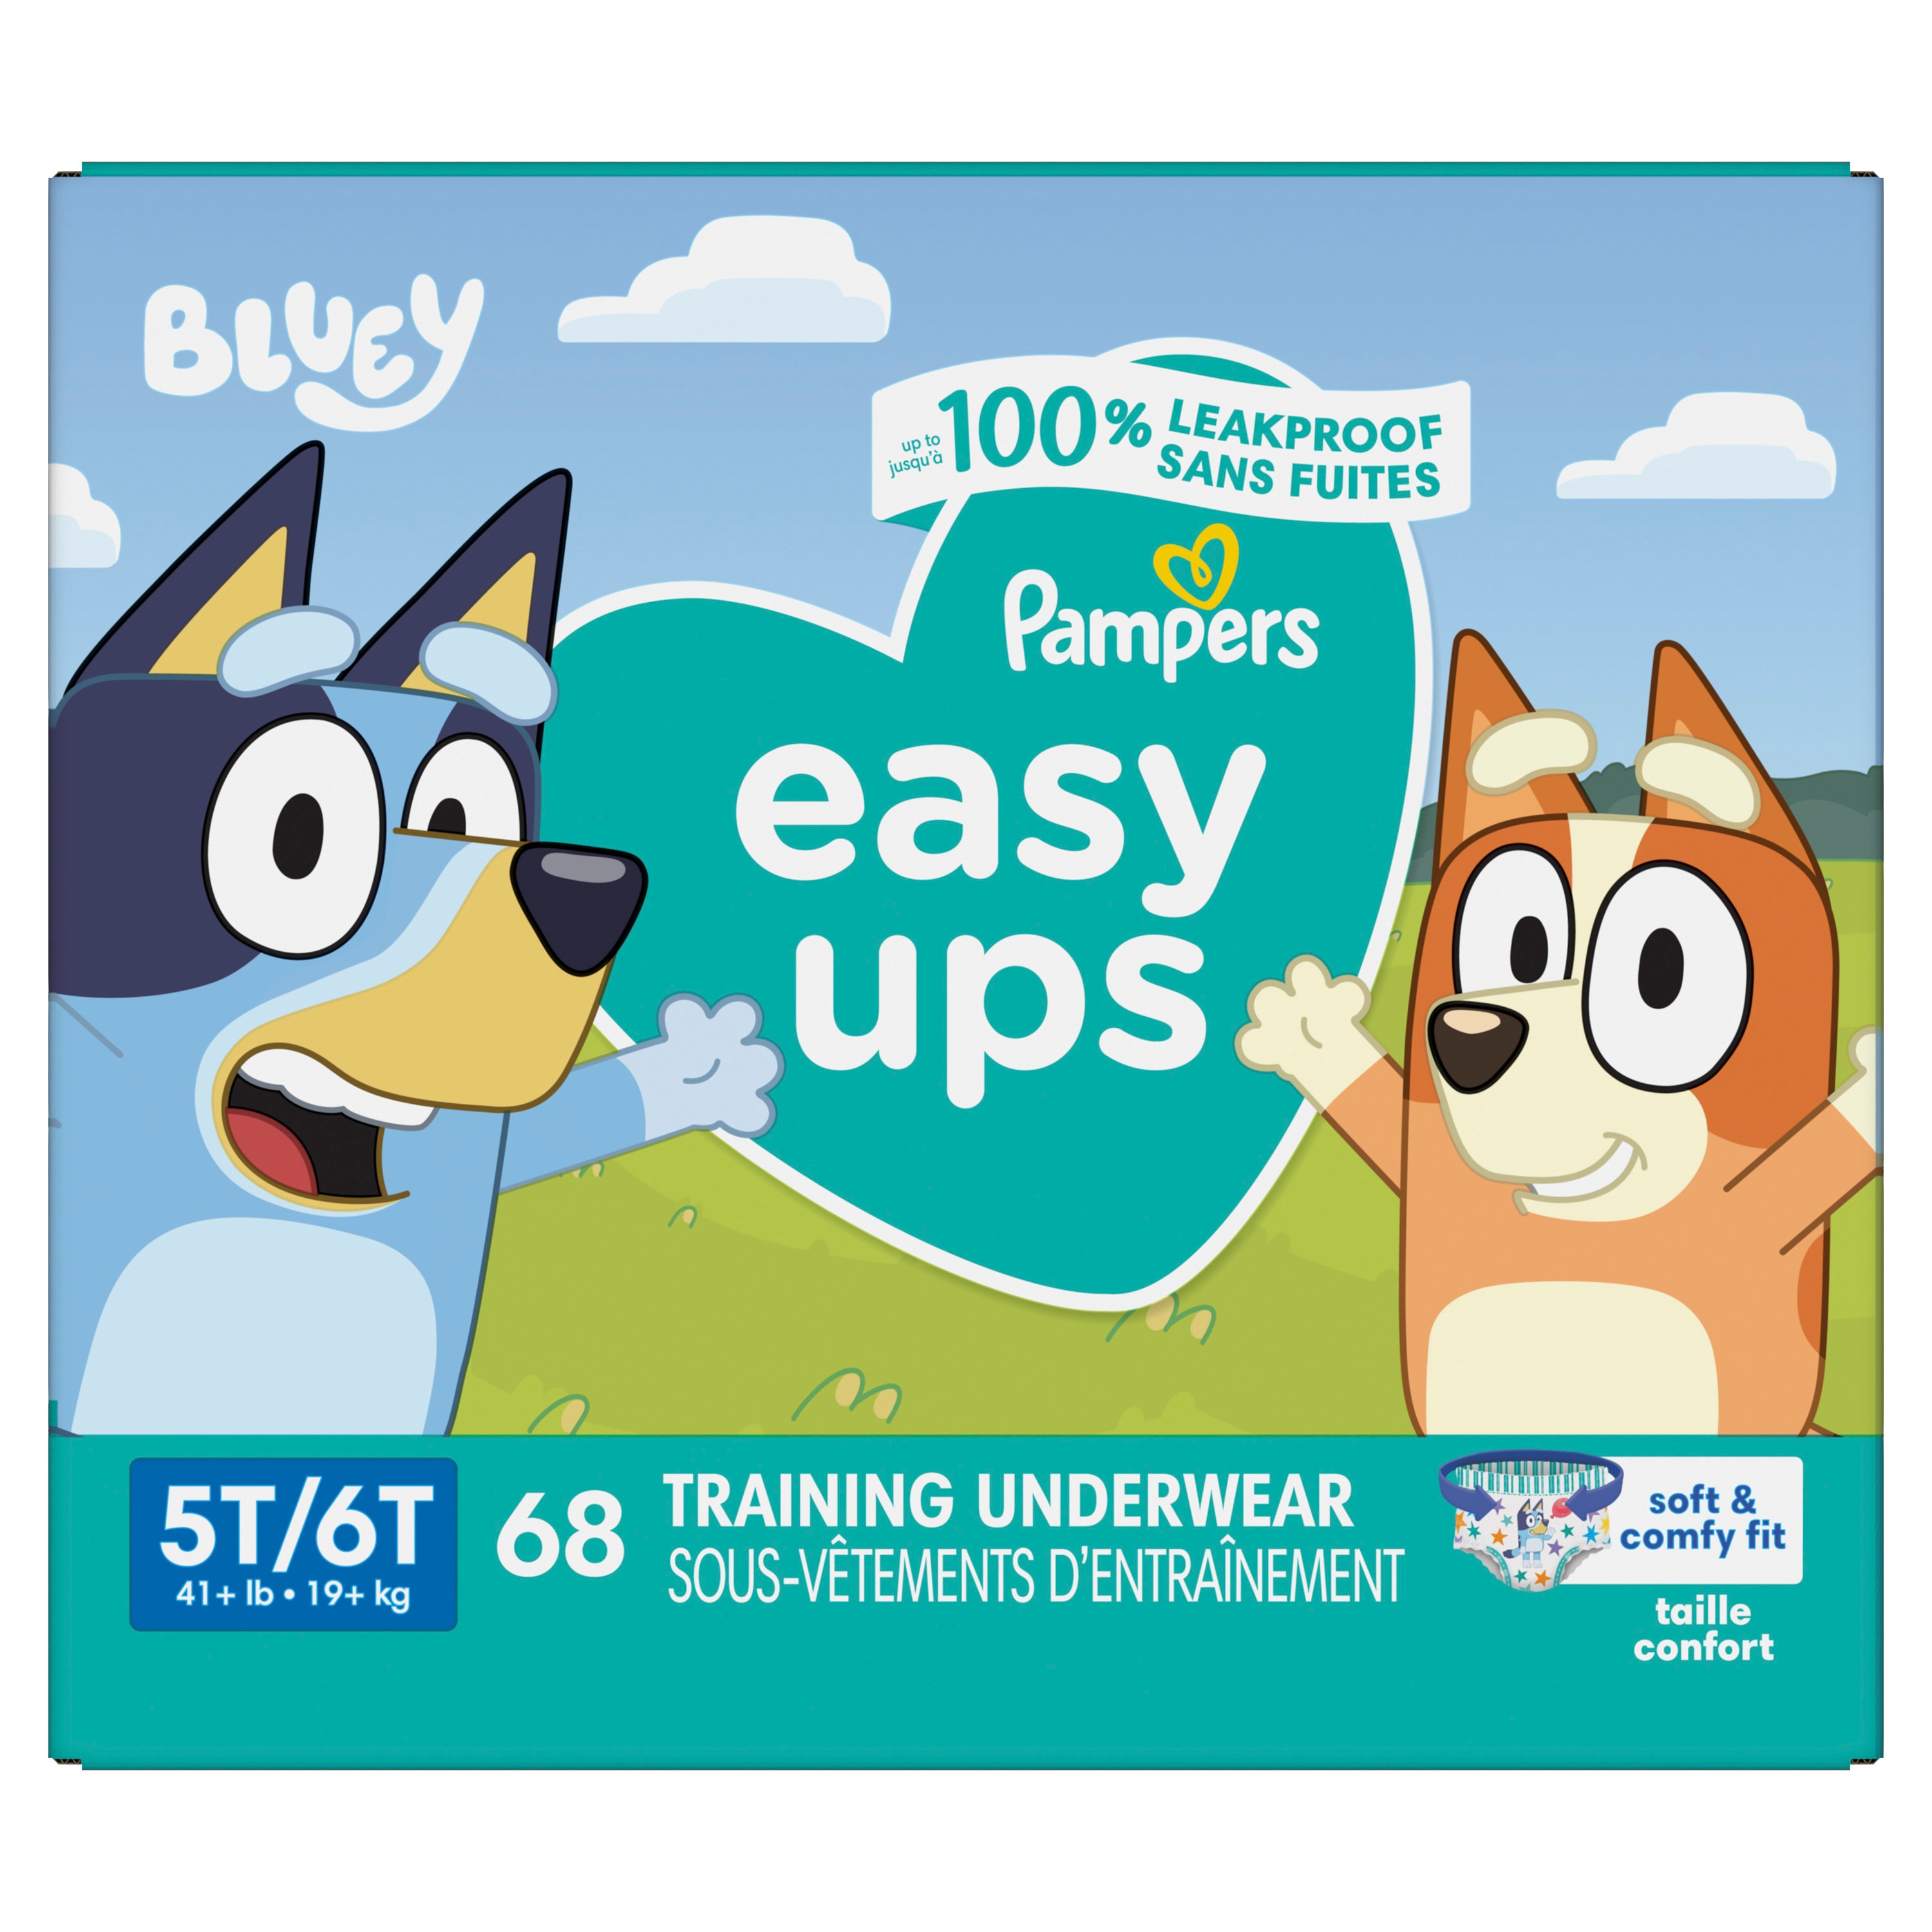 Pampers Easy Ups Training Underwear Girls, Size 4T-5T, 74 Ct